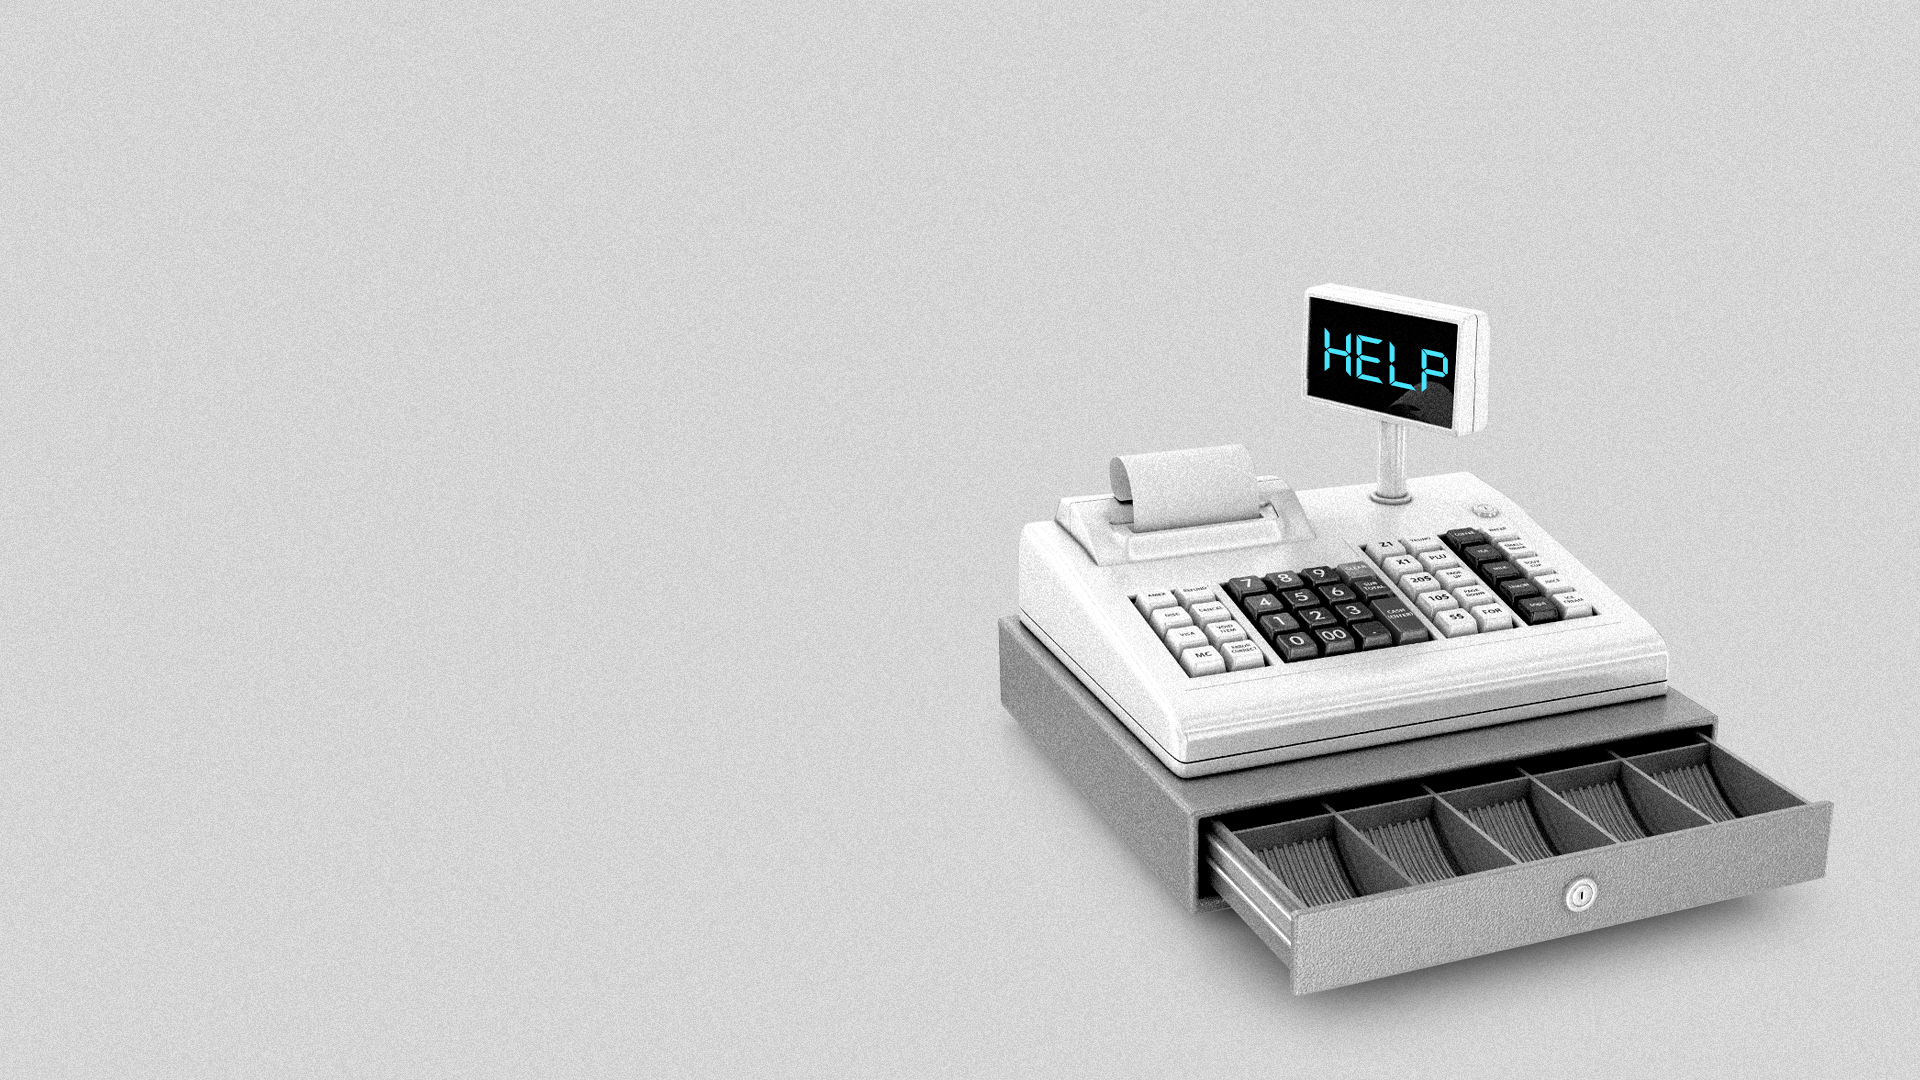 Illustration of an empty cash register with display flashing "HELP."